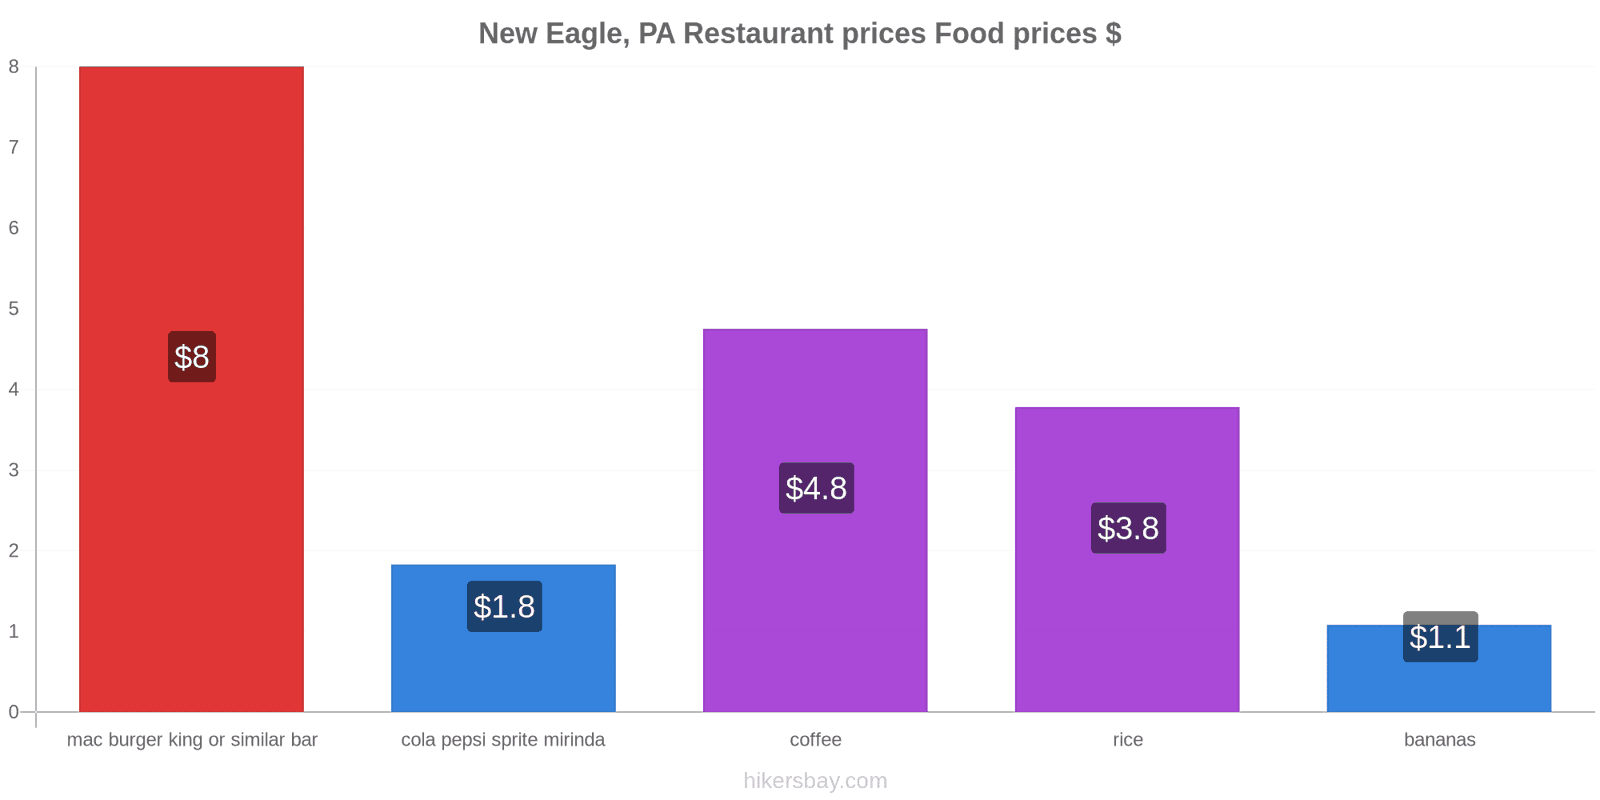 New Eagle, PA price changes hikersbay.com